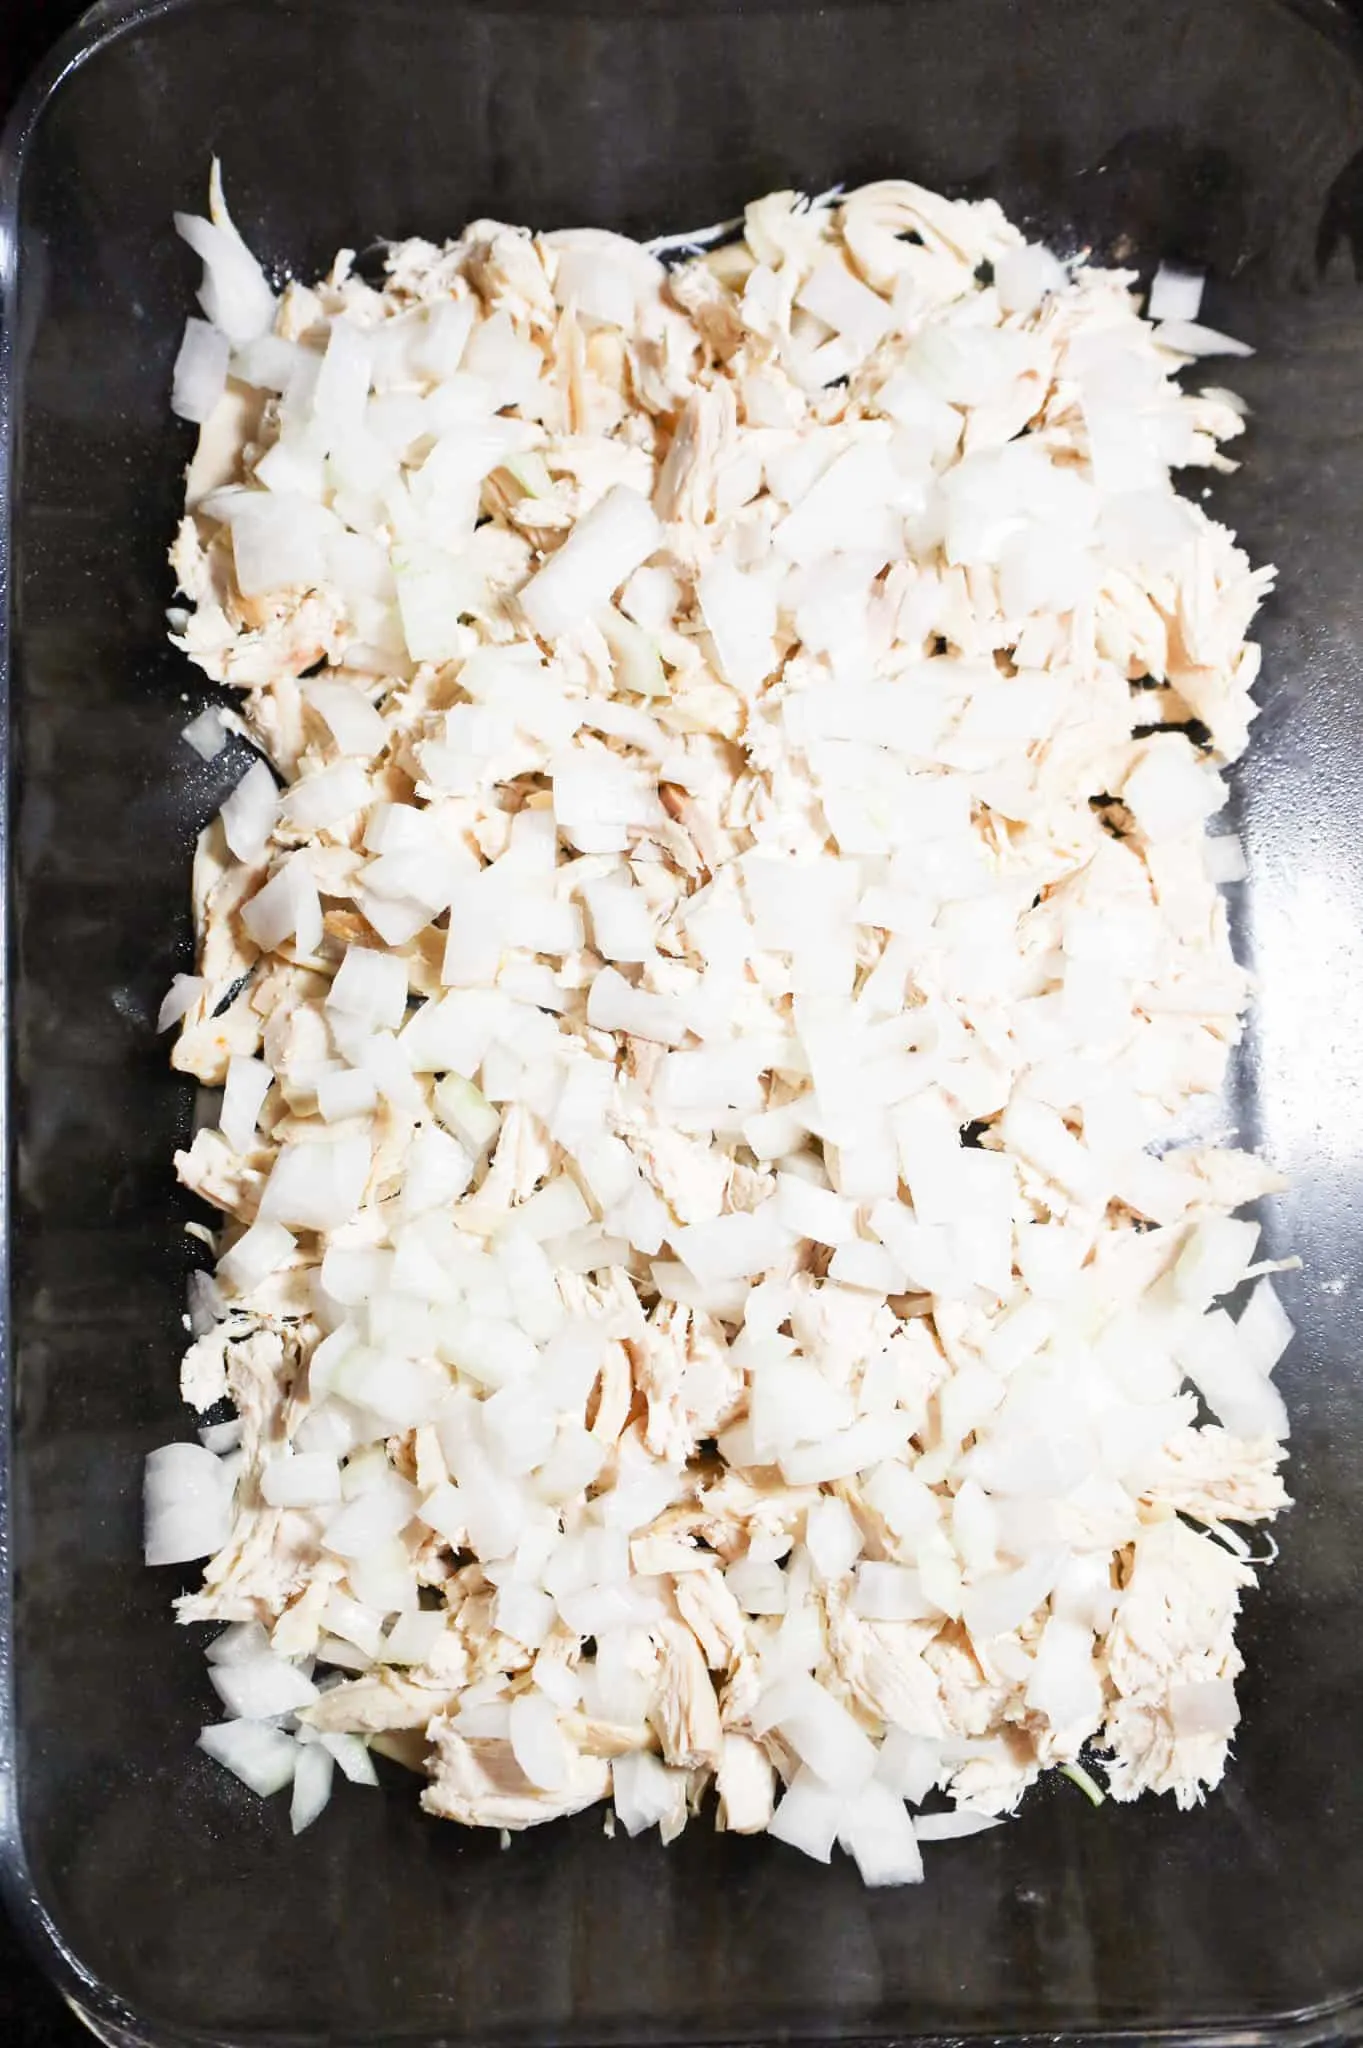 diced onions and shredded chicken in a baking dish